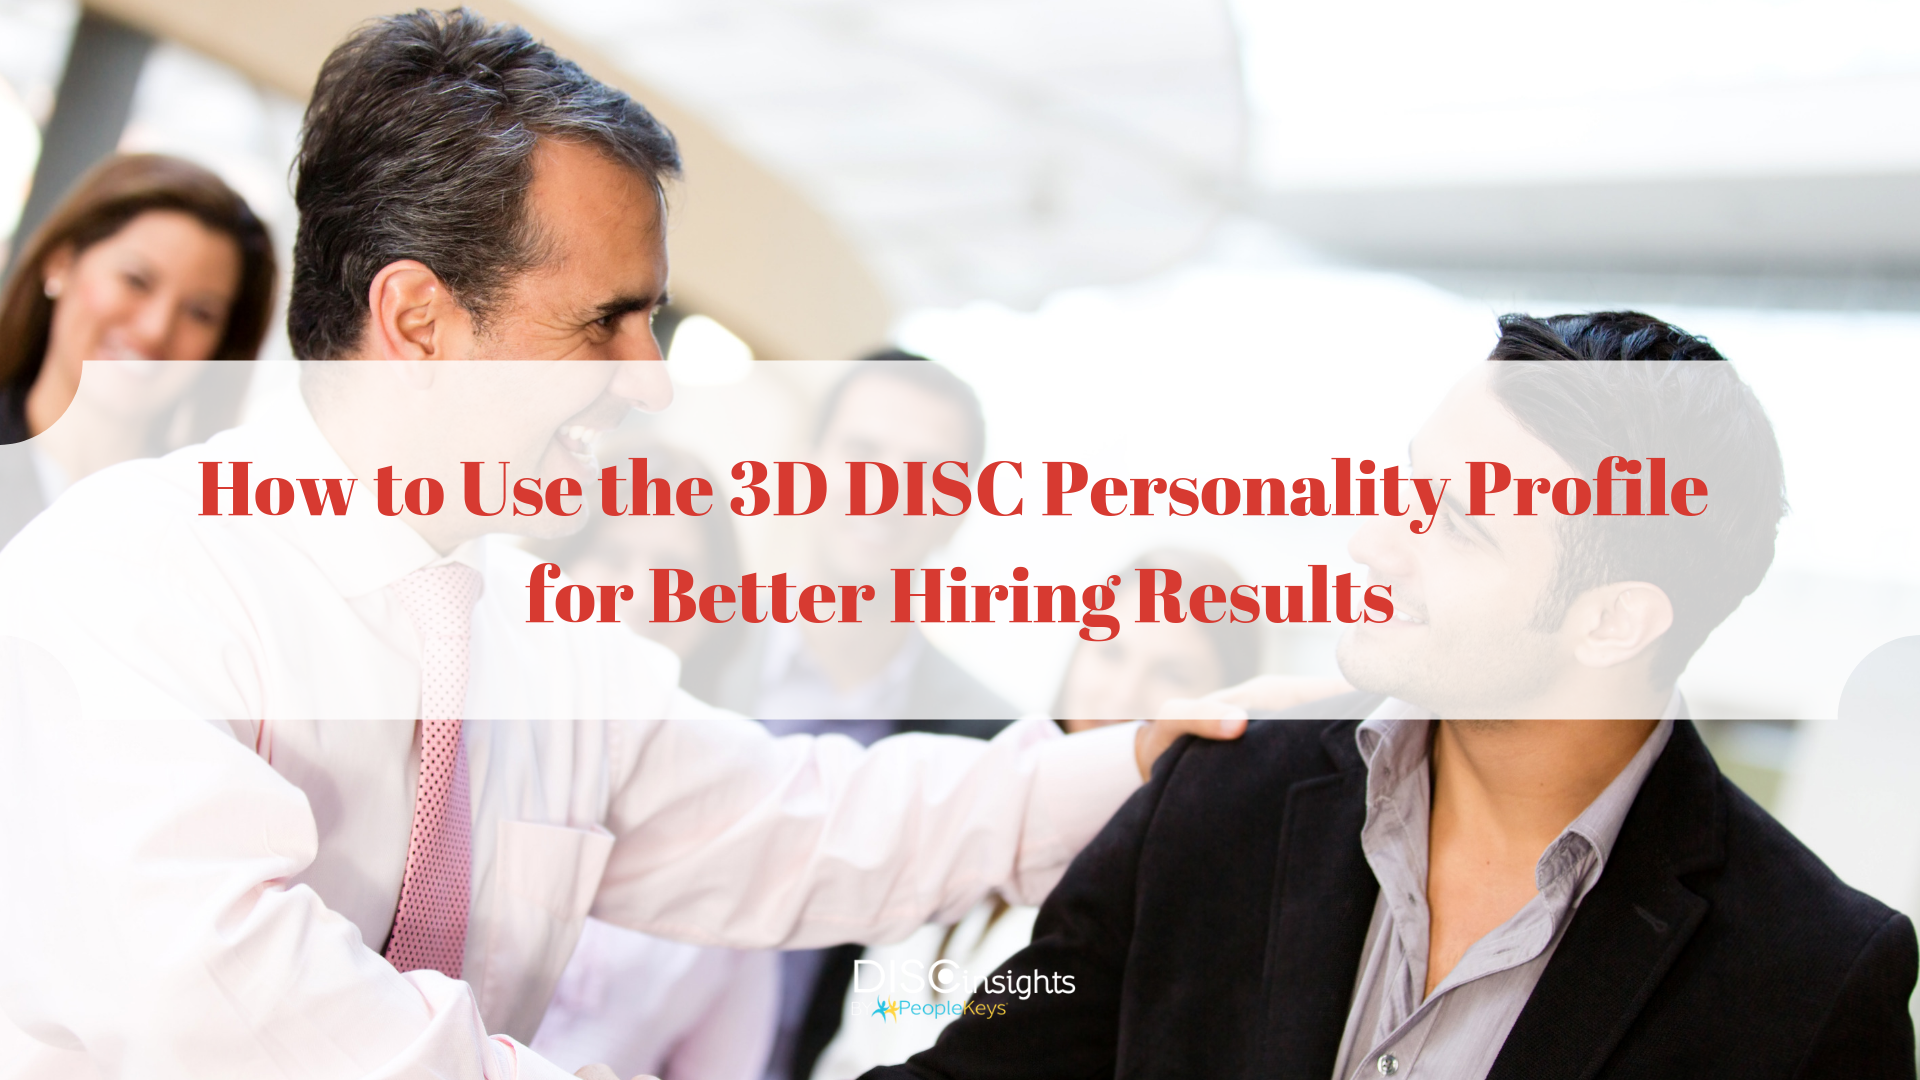 How to Use the 3D DISC Personality Profile for Better Hiring Results